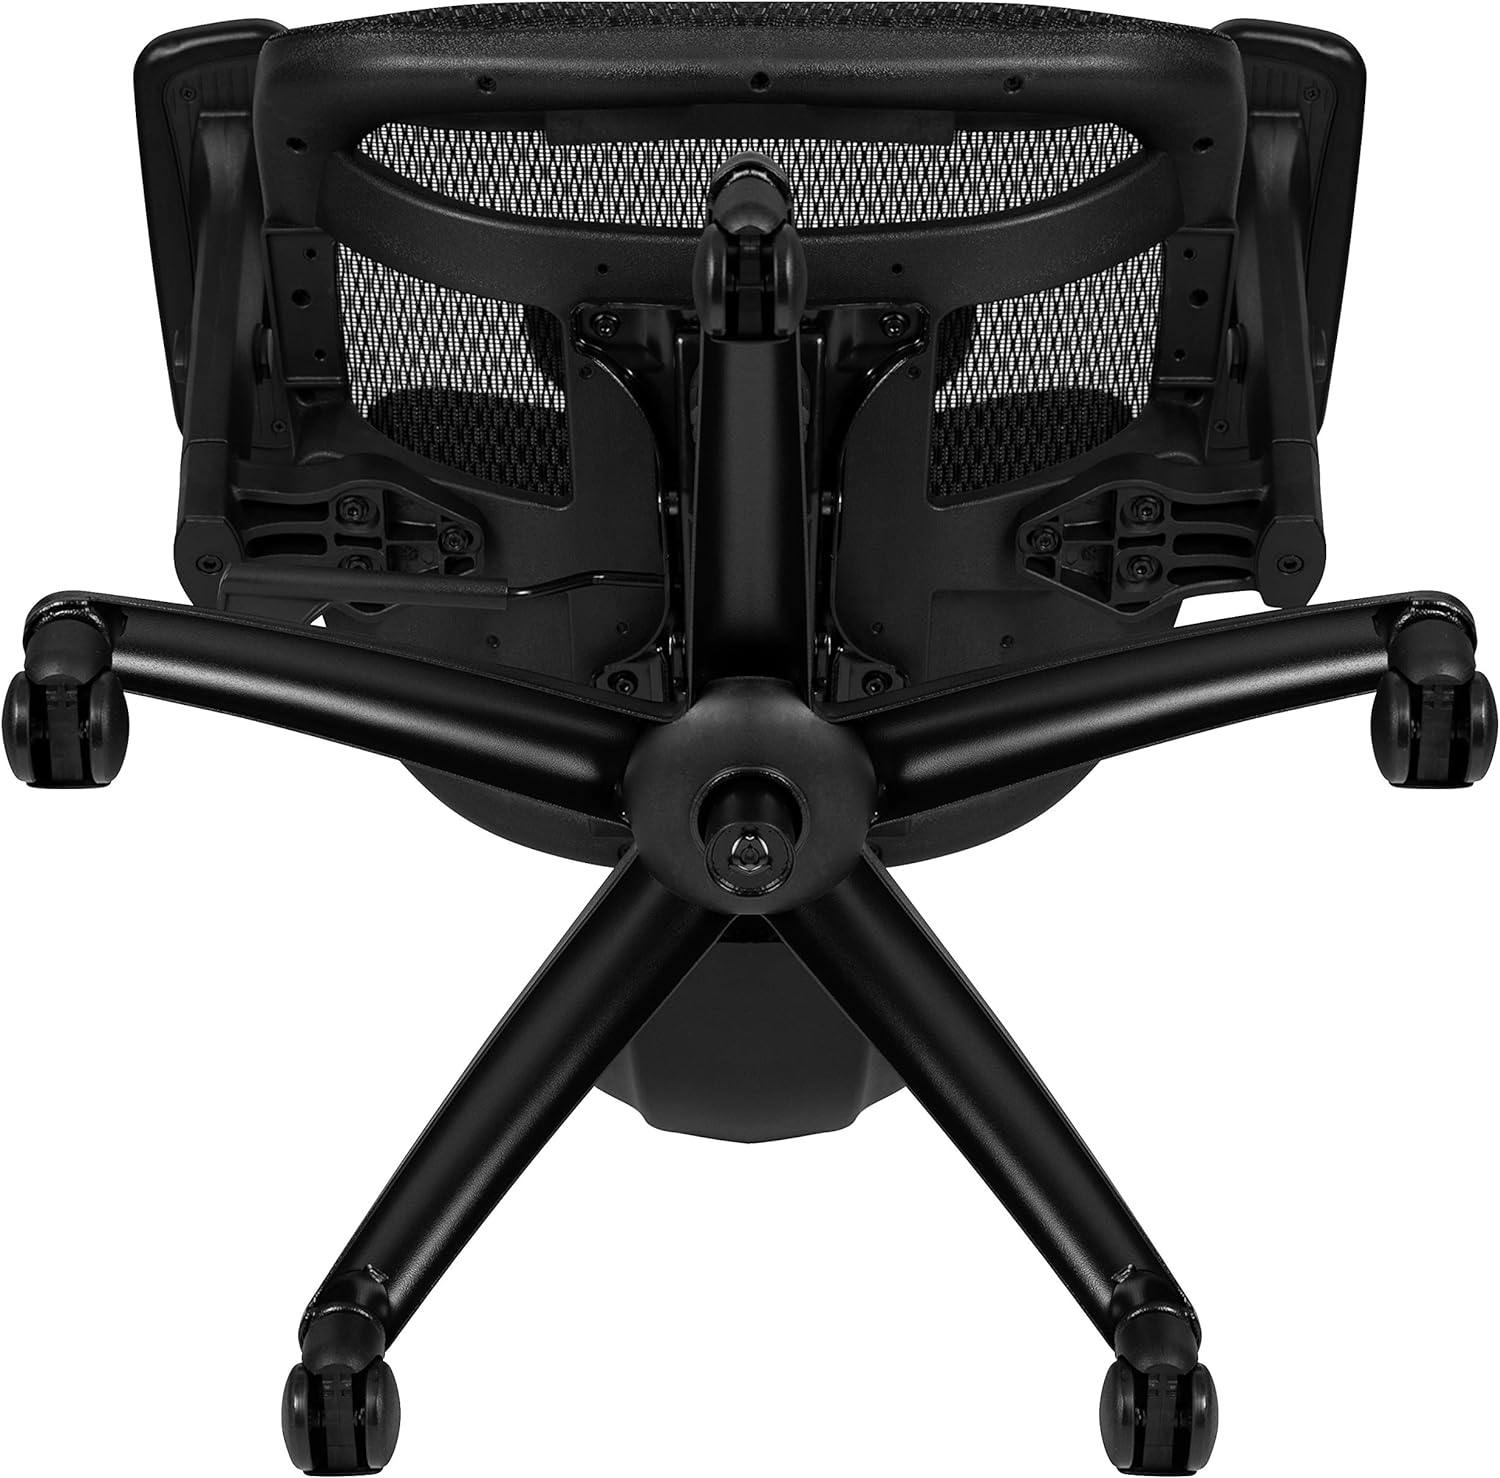 Ergonomic High-Back Swivel Task Chair with Adjustable Arms in Black